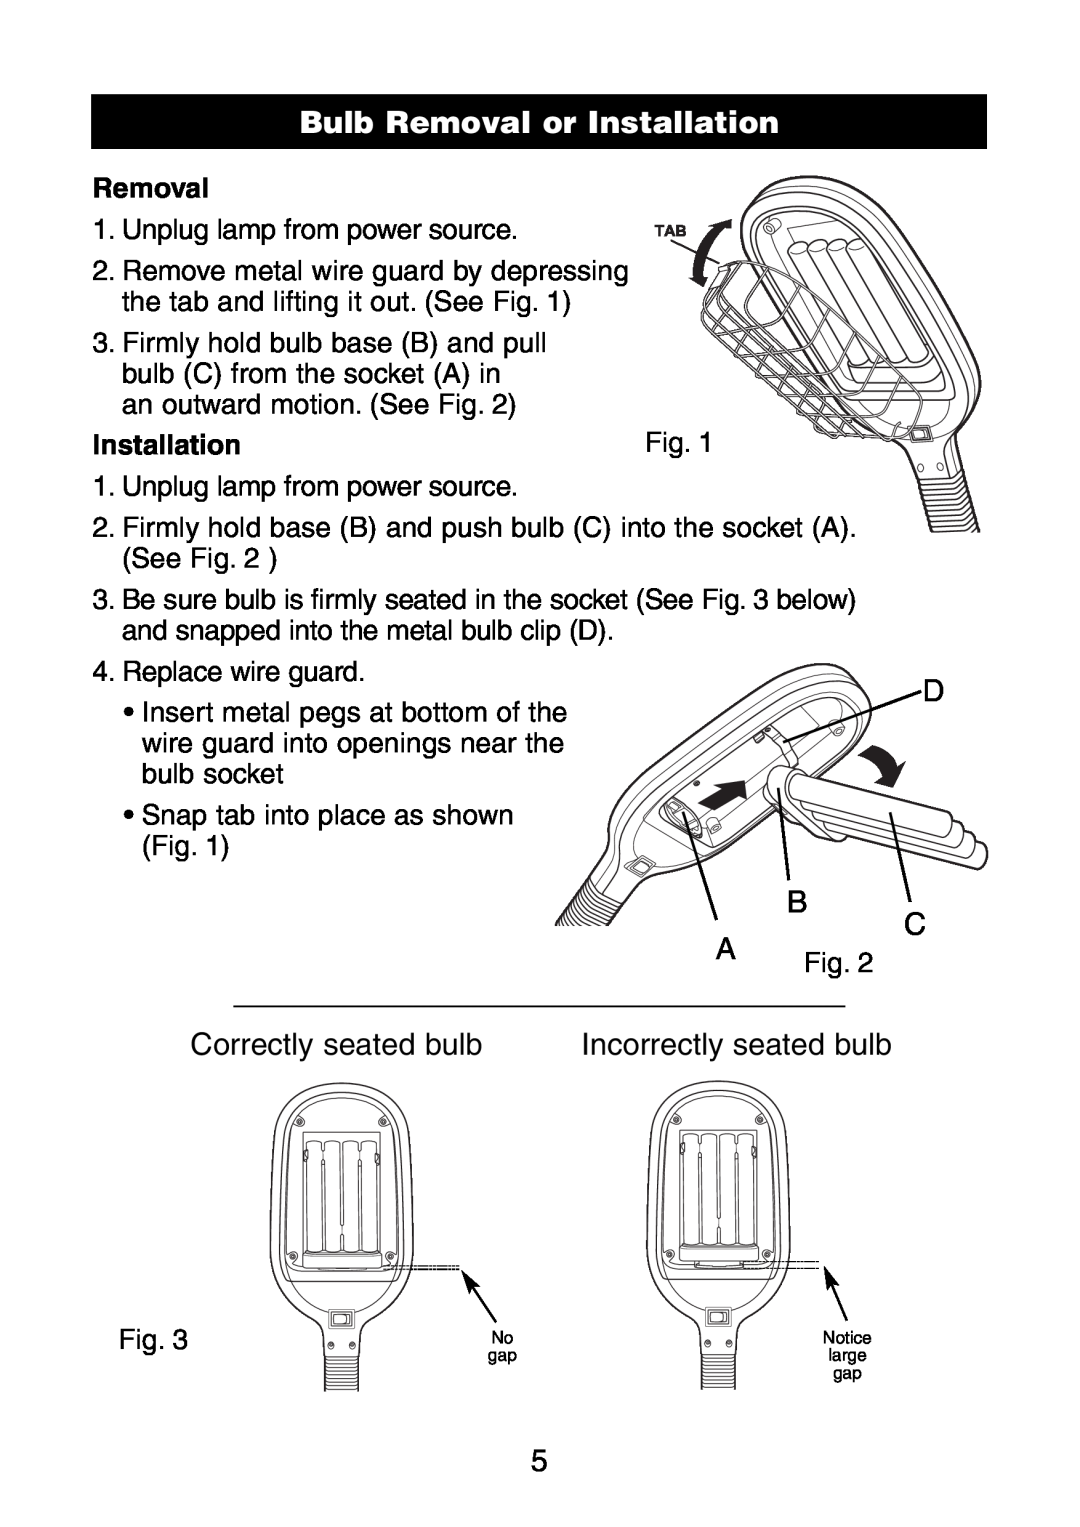 Verilux VC01HH1 instruction manual Bulb Removal or Installation, Correctly seated bulb, Incorrectly seated bulb 